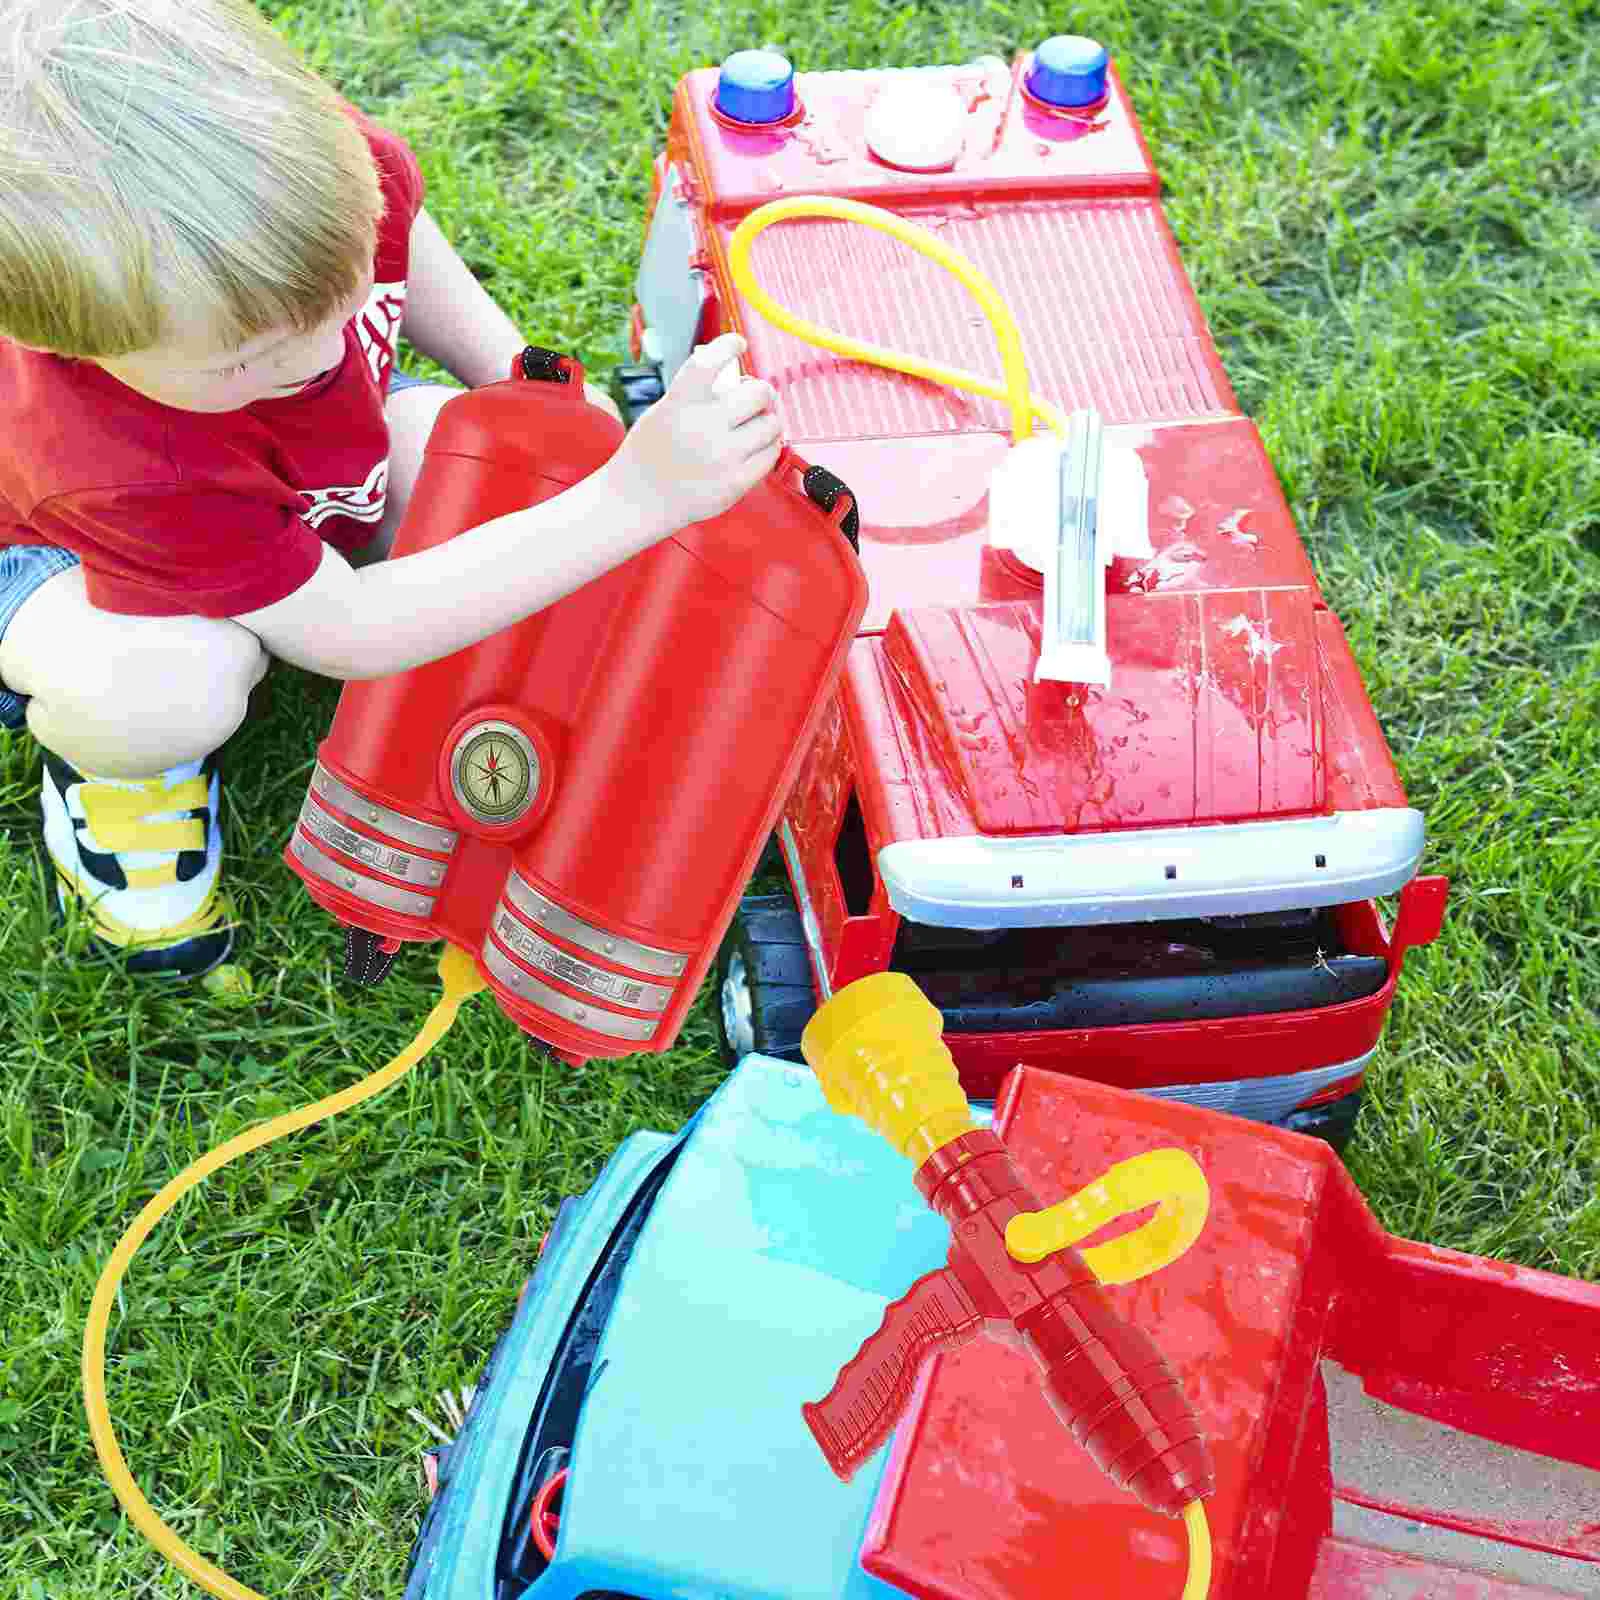 

Fire Water Toy Squirt Guns Outdoor Toys Kids Swimming Pool Role Play Fighting Firefighter Shooter